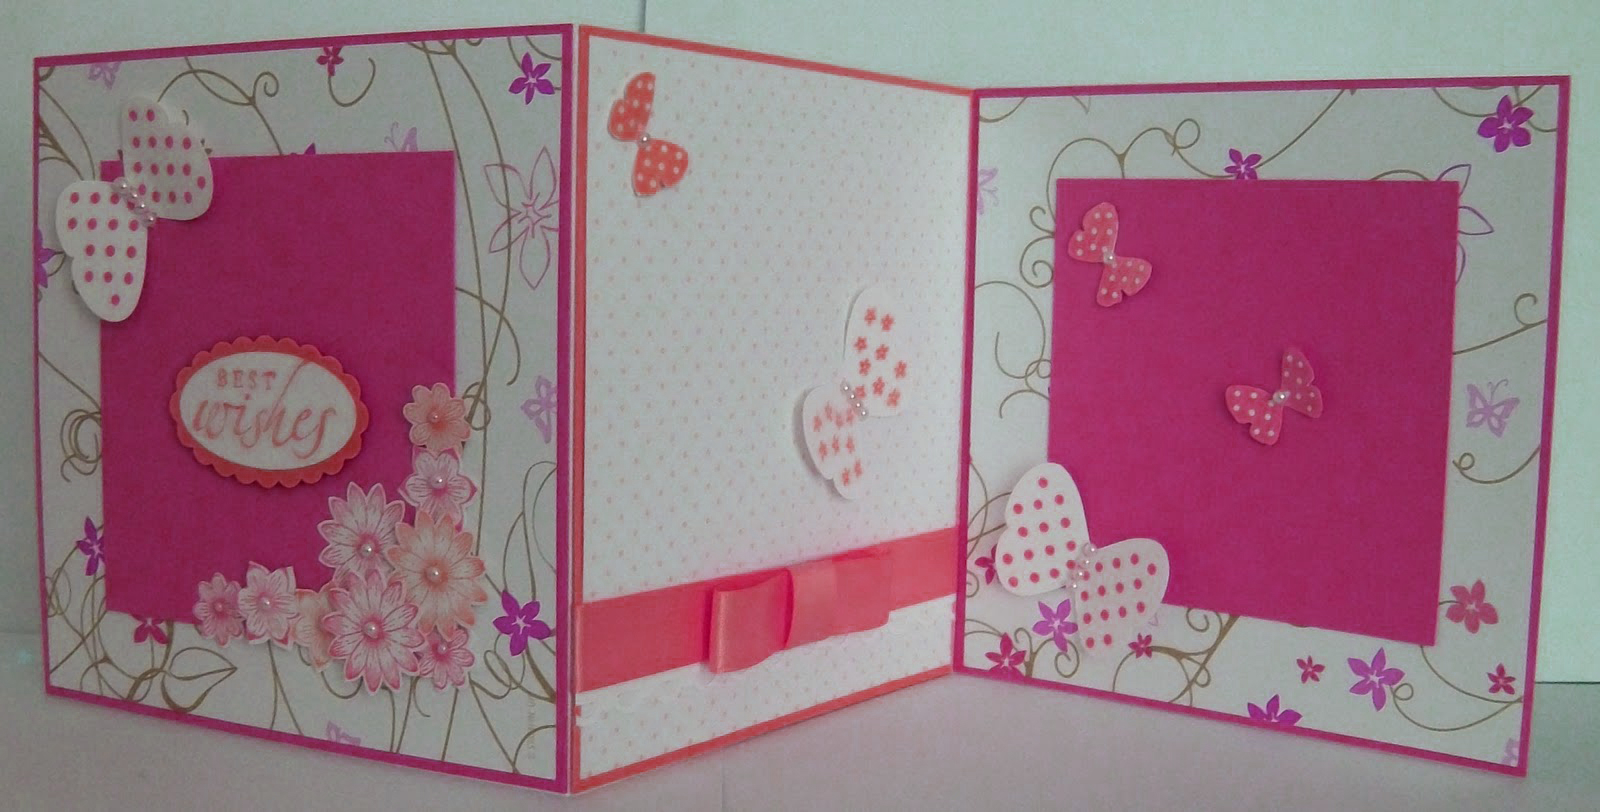 Ideas To Make Birthday Cards 92 Ideas Of Making A Birthday Card Fays Studio Daughter Card Diy